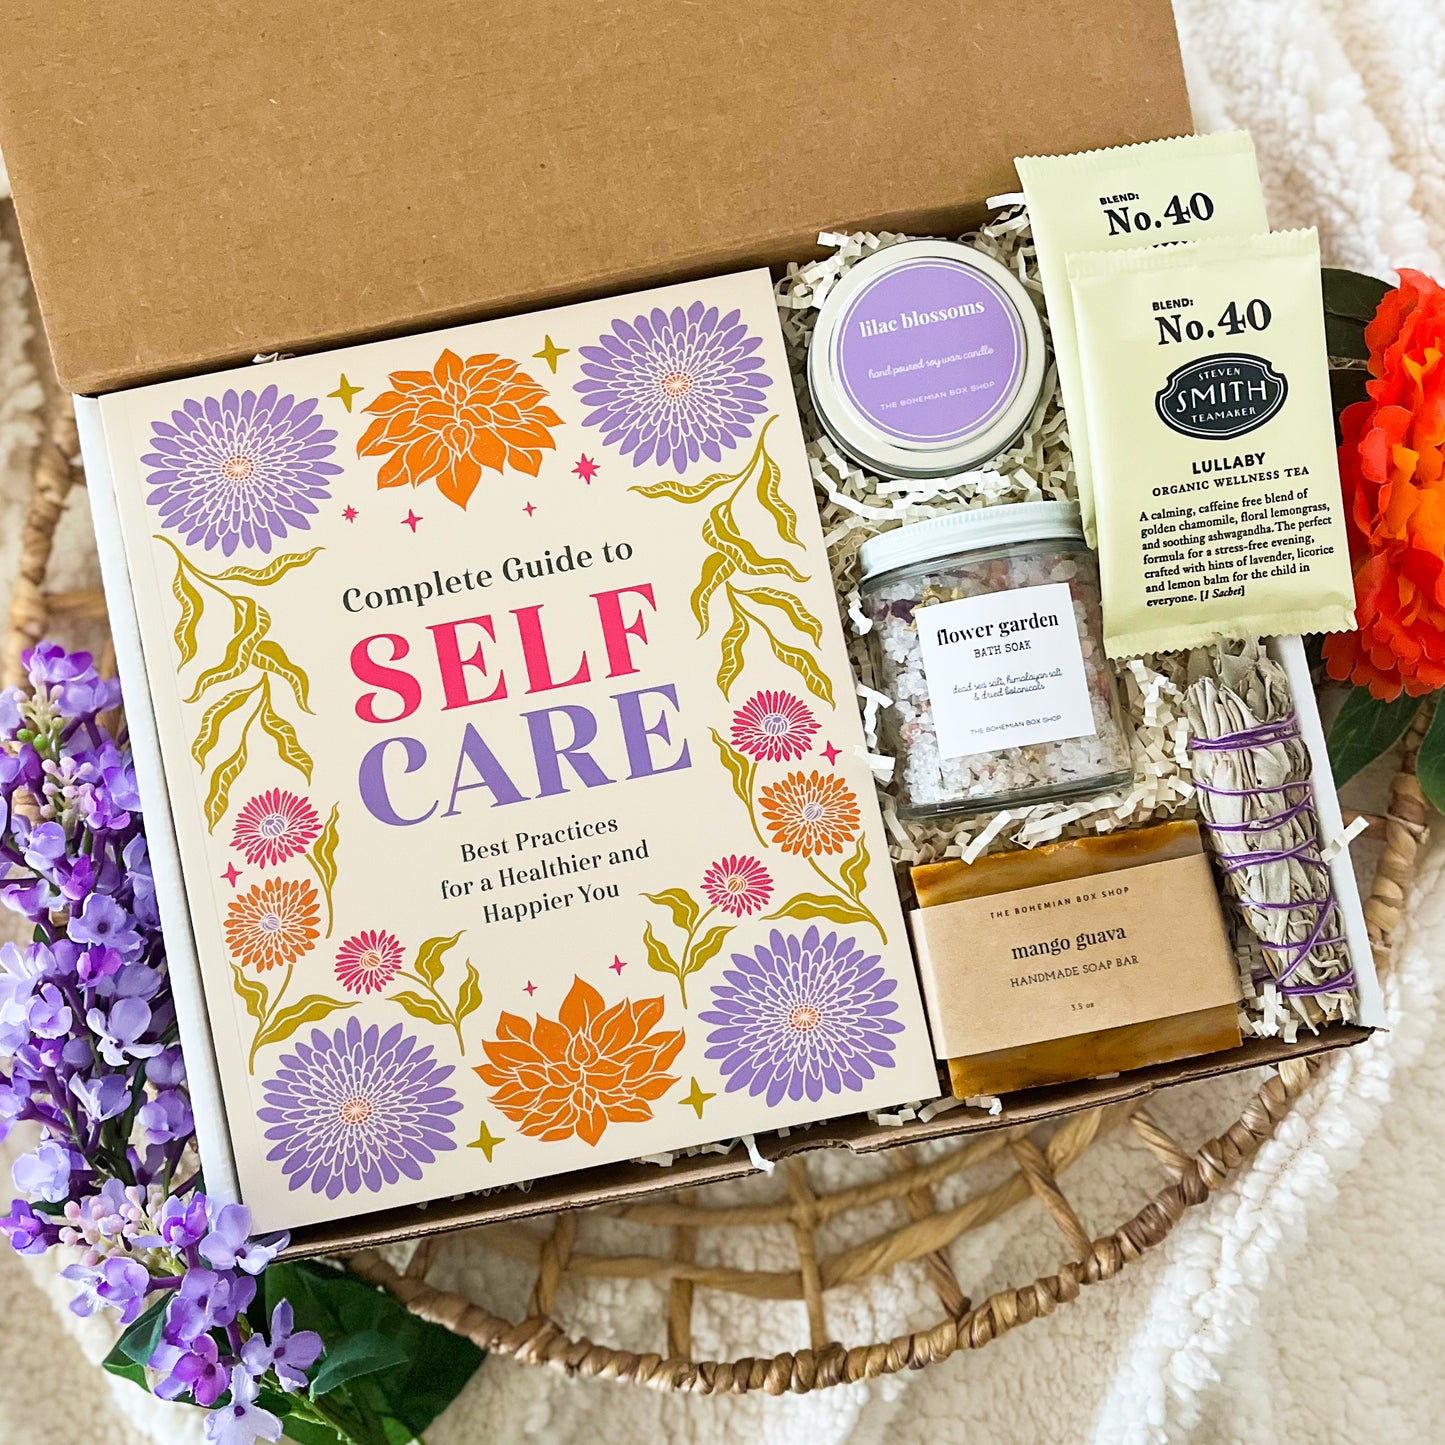 Self-care gift set for women. Includes a complete guy to self-care book, lilac soy candle, flower garden bath soak mango guava soap, tea packets, and mini sage bundle. ￼